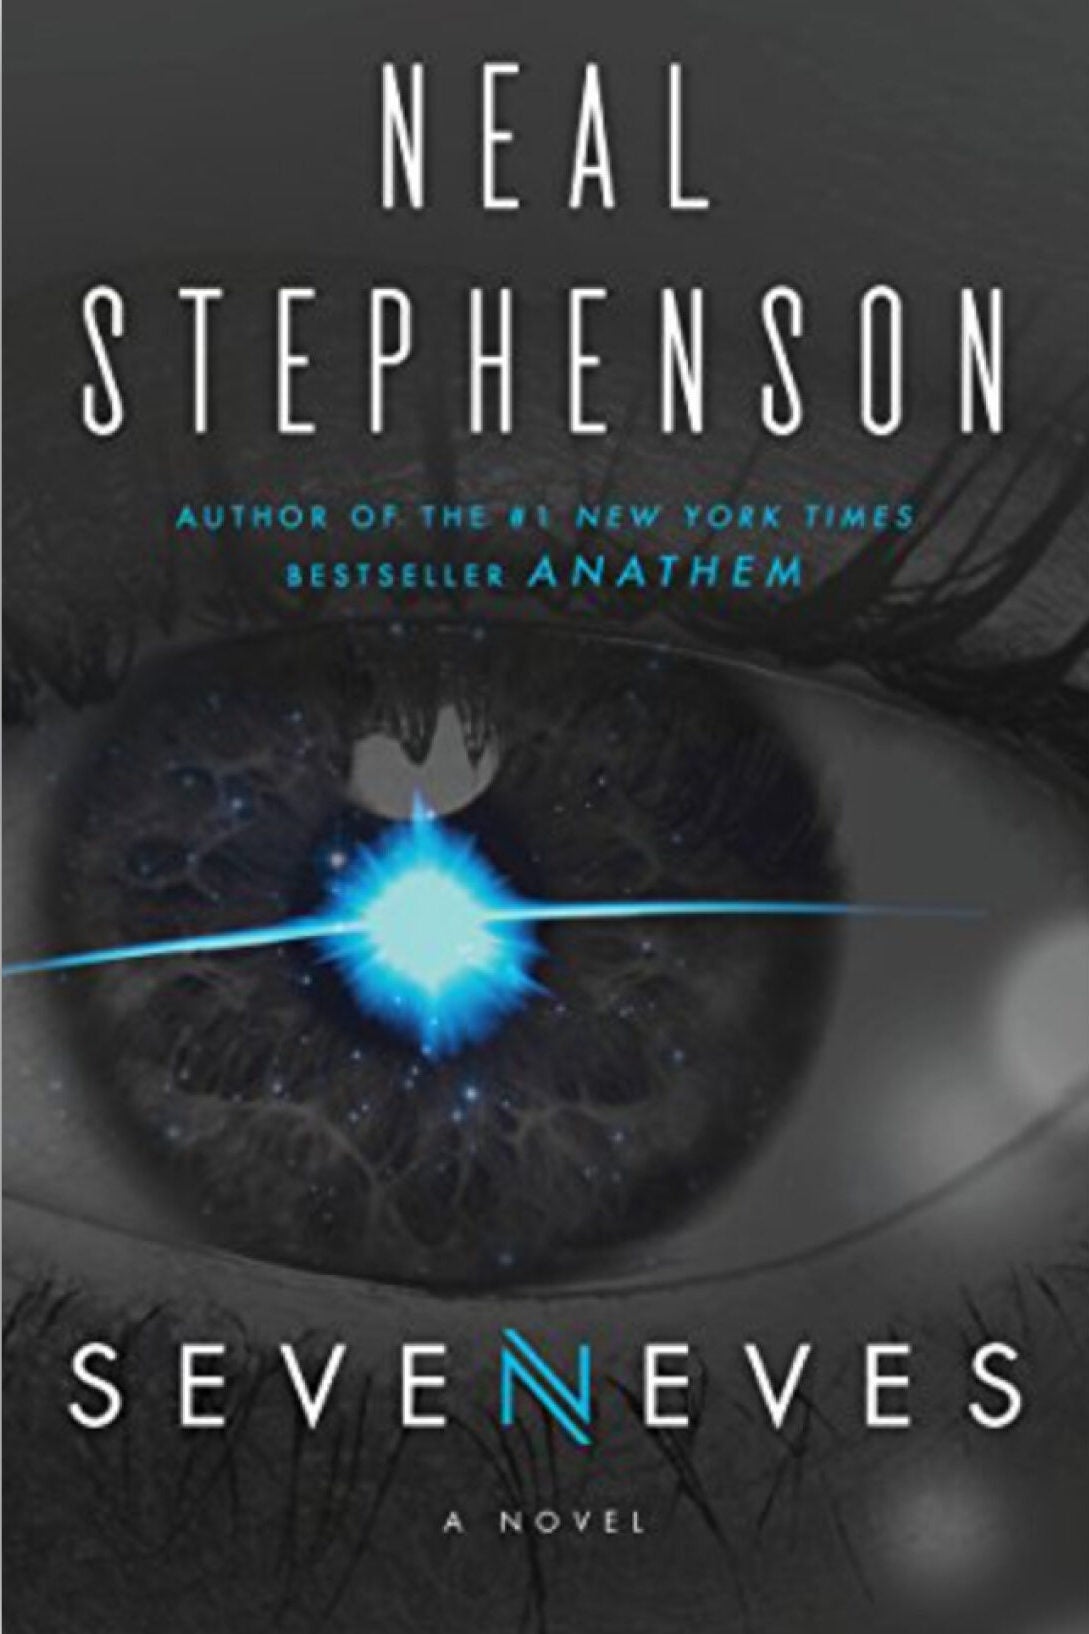 Book cover: "Seveneves” by Neal Stephenson.